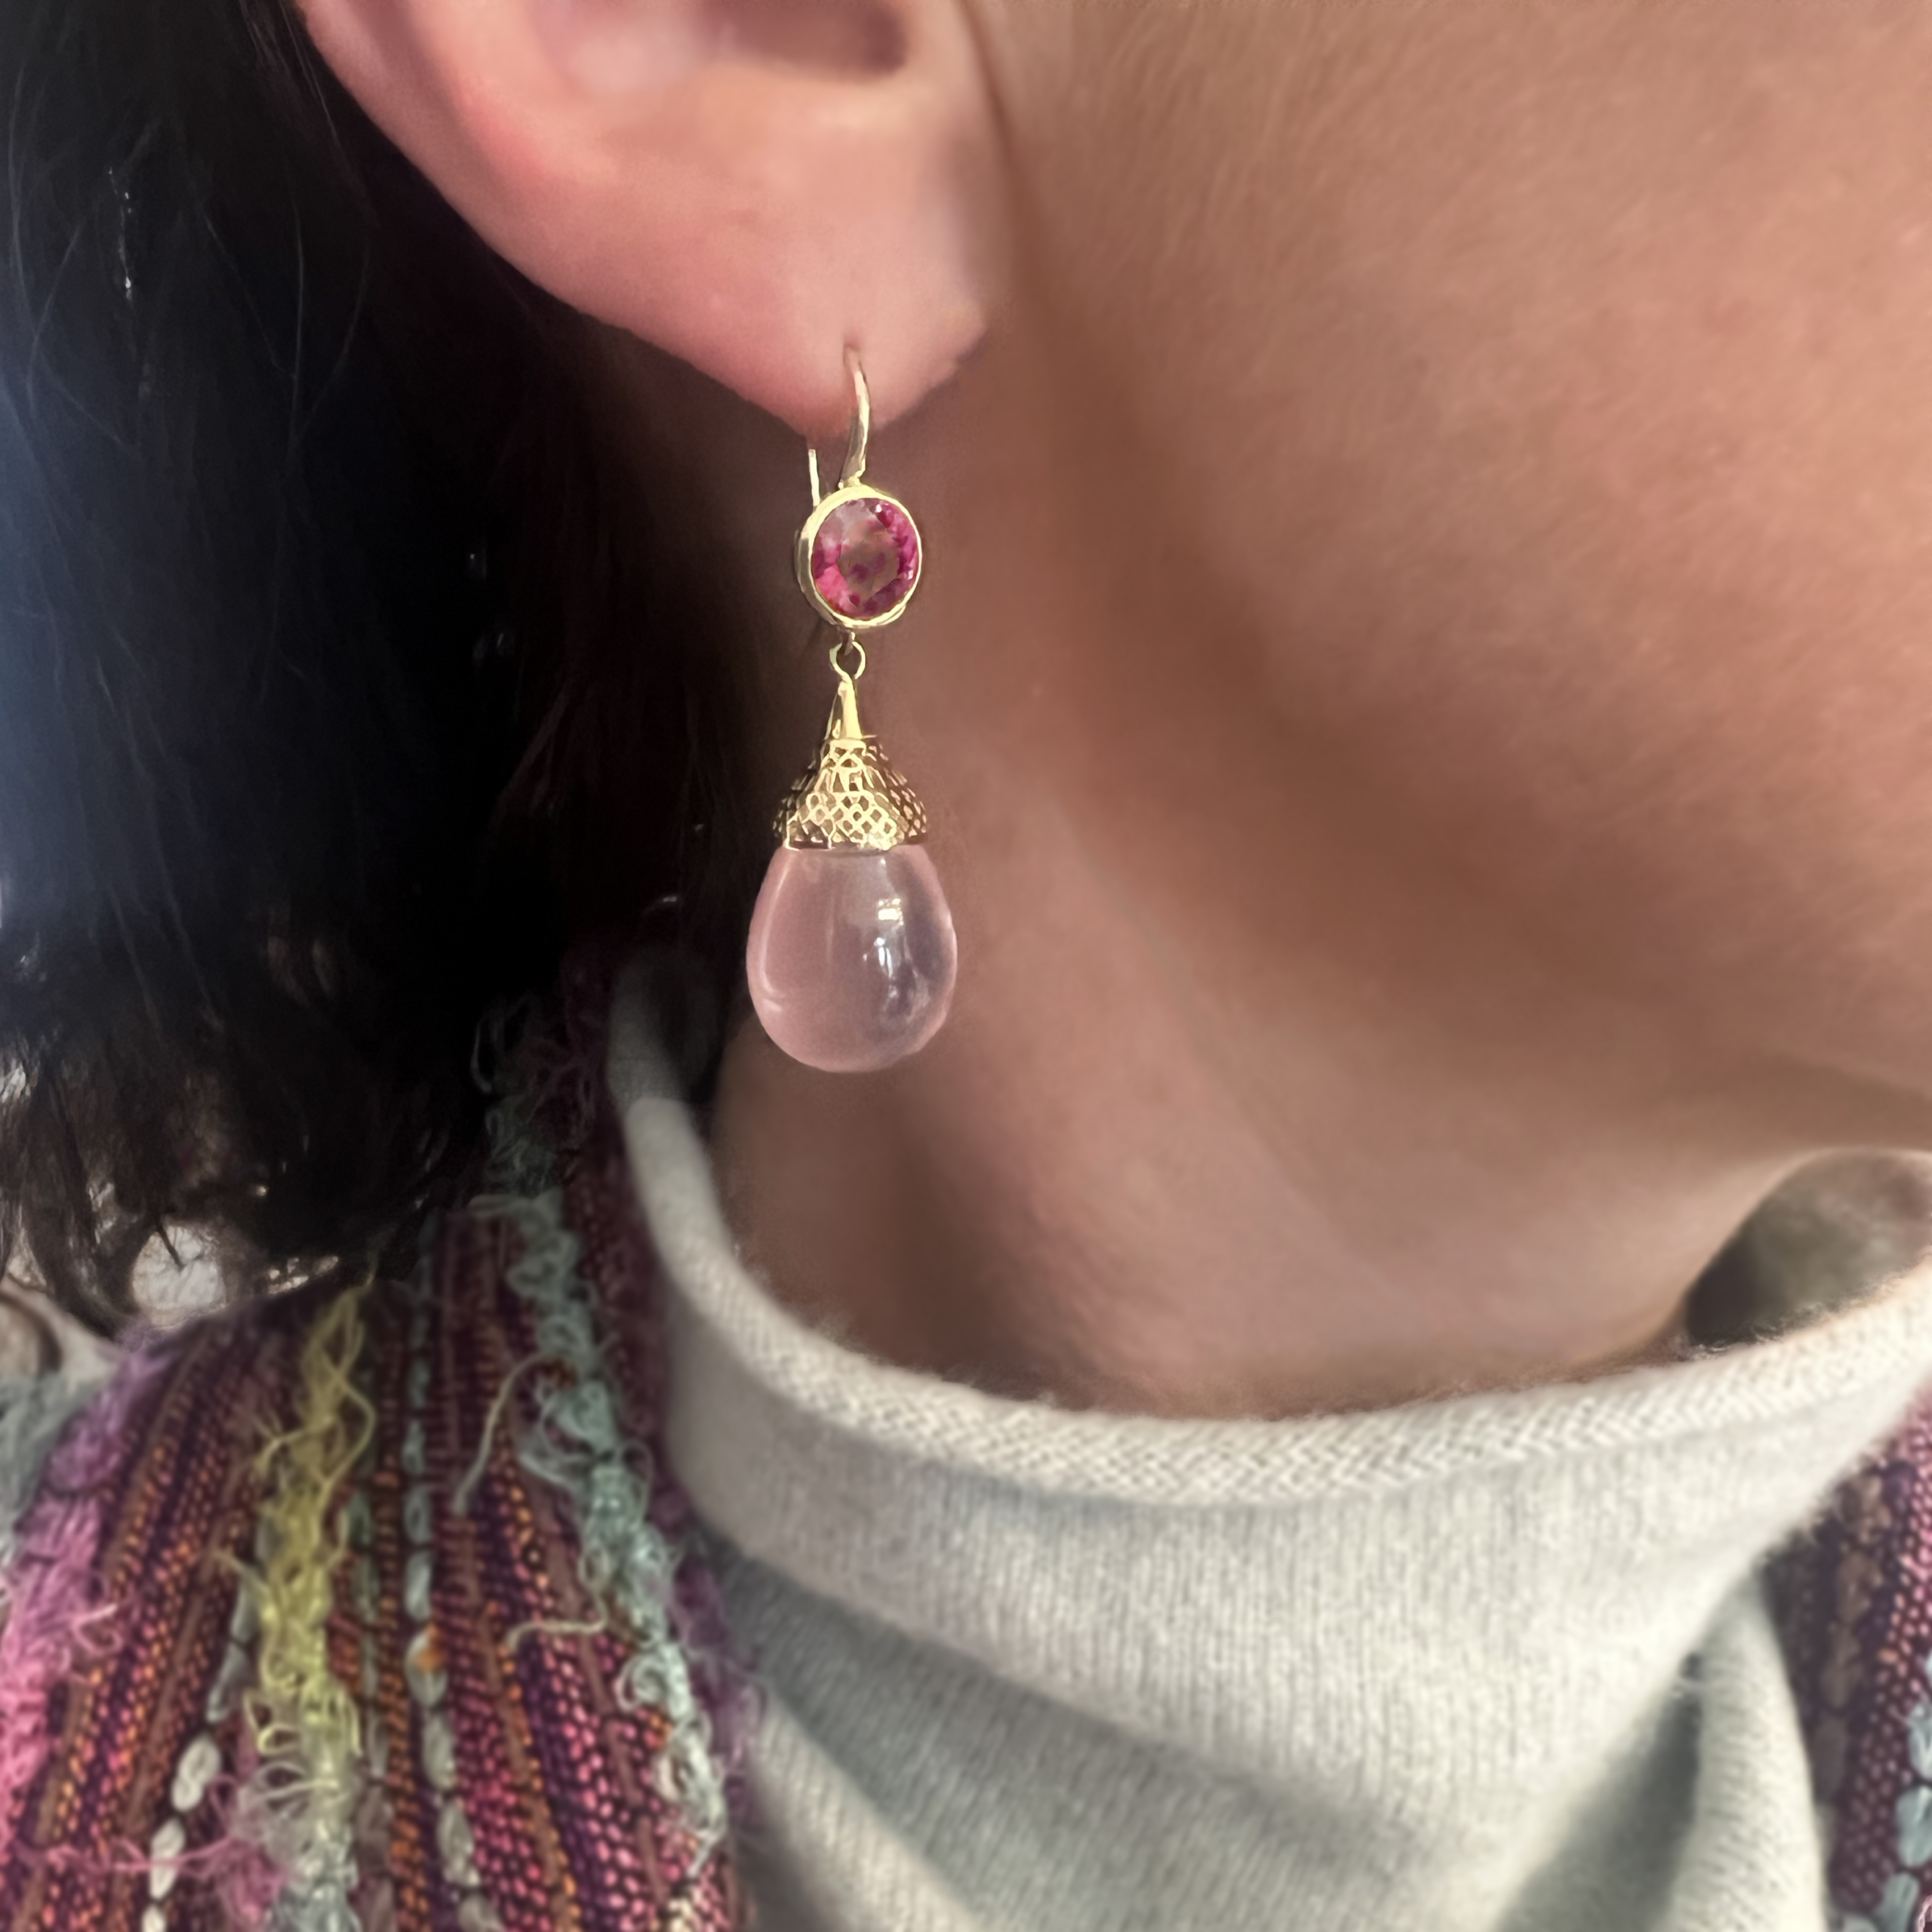 This is an image of bright pink rhodolite garnet earrings on hooks with pale pink rose quartz drops being worn by a model